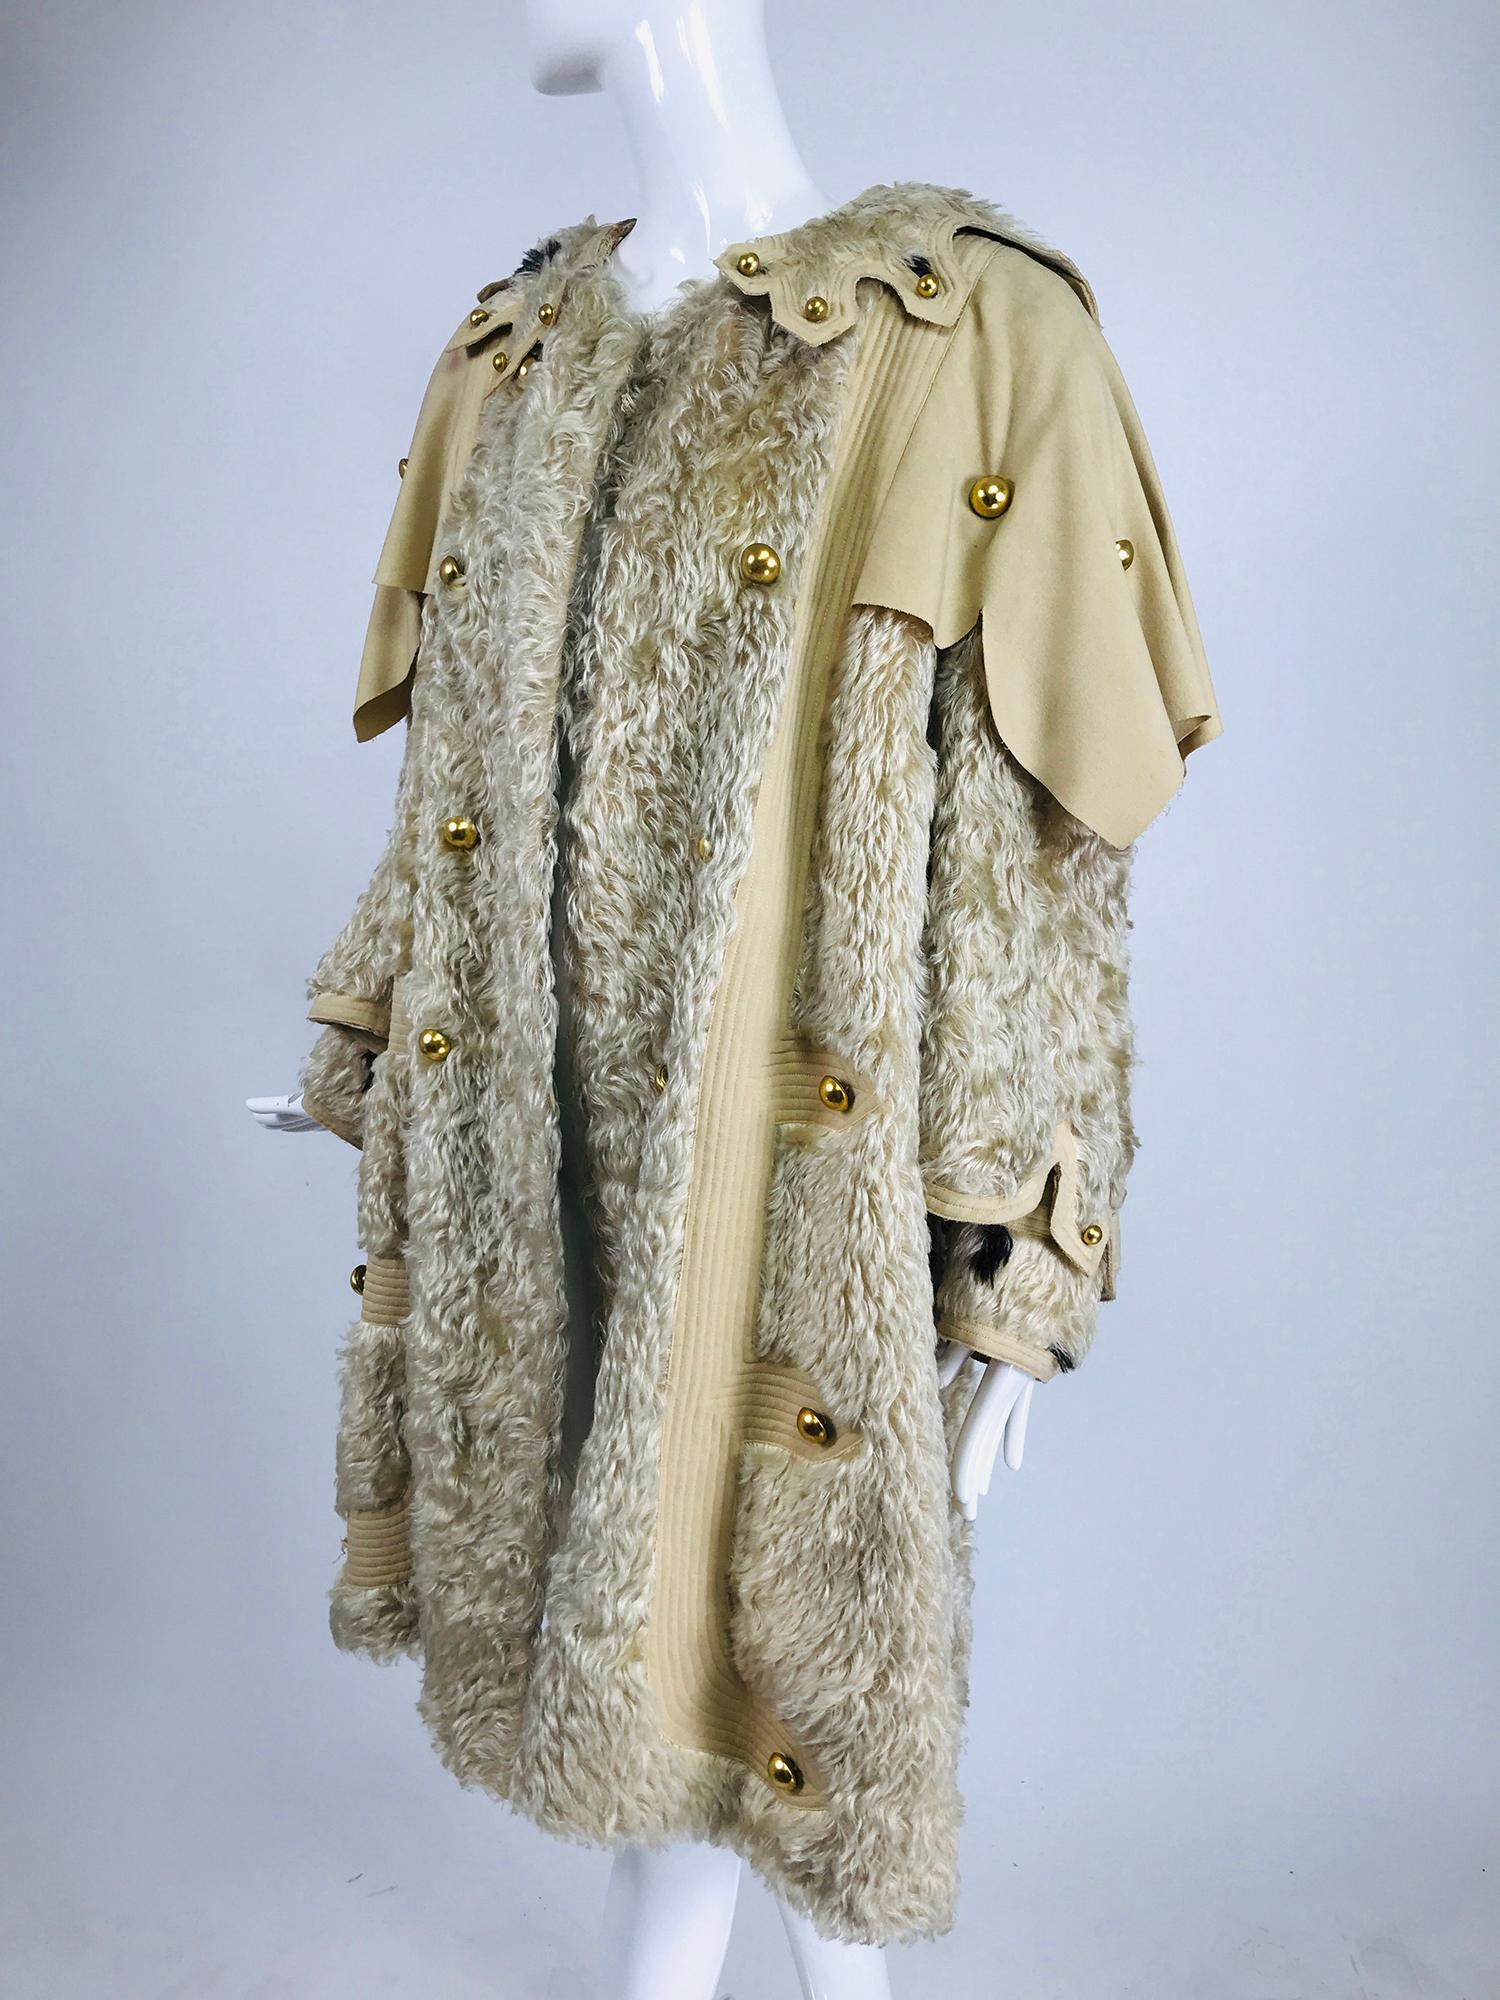 Rare 1890s women's cream shaggy mohair and wool winter over coat. Complete your Victorian wardrobe with a winter coat that is very unique! The sleeves and coat is made from long shaggy wool back mohair fabric, it is made to mimic ermine tails down